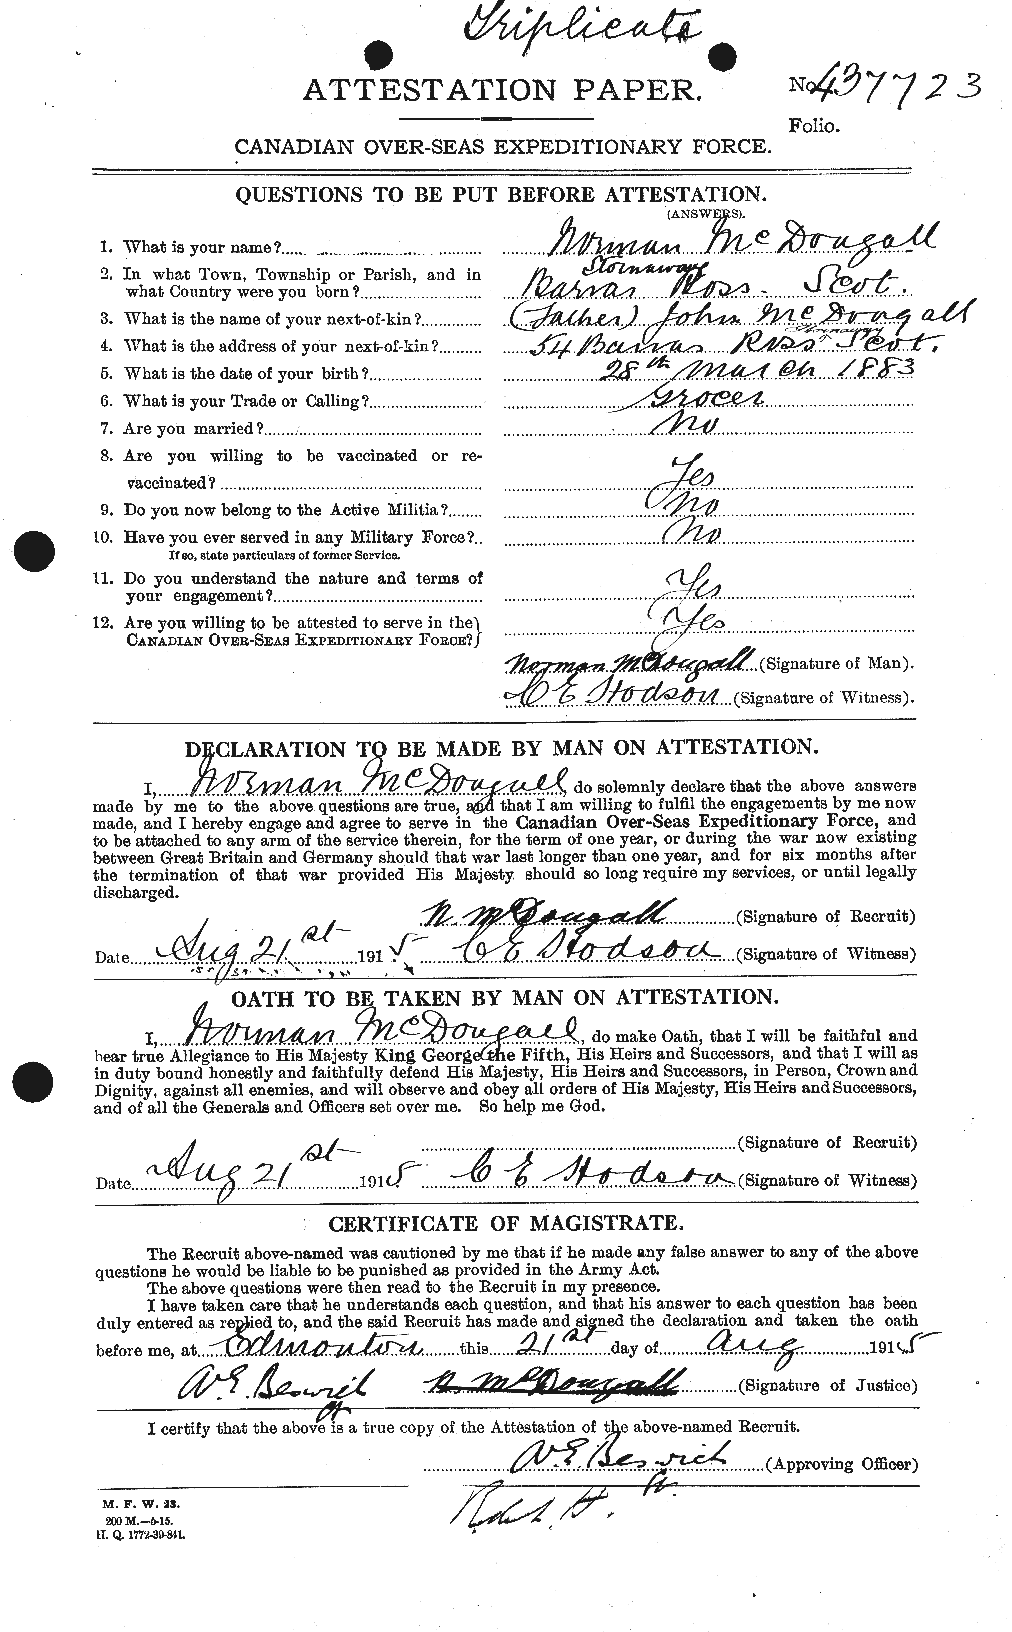 Personnel Records of the First World War - CEF 518344a